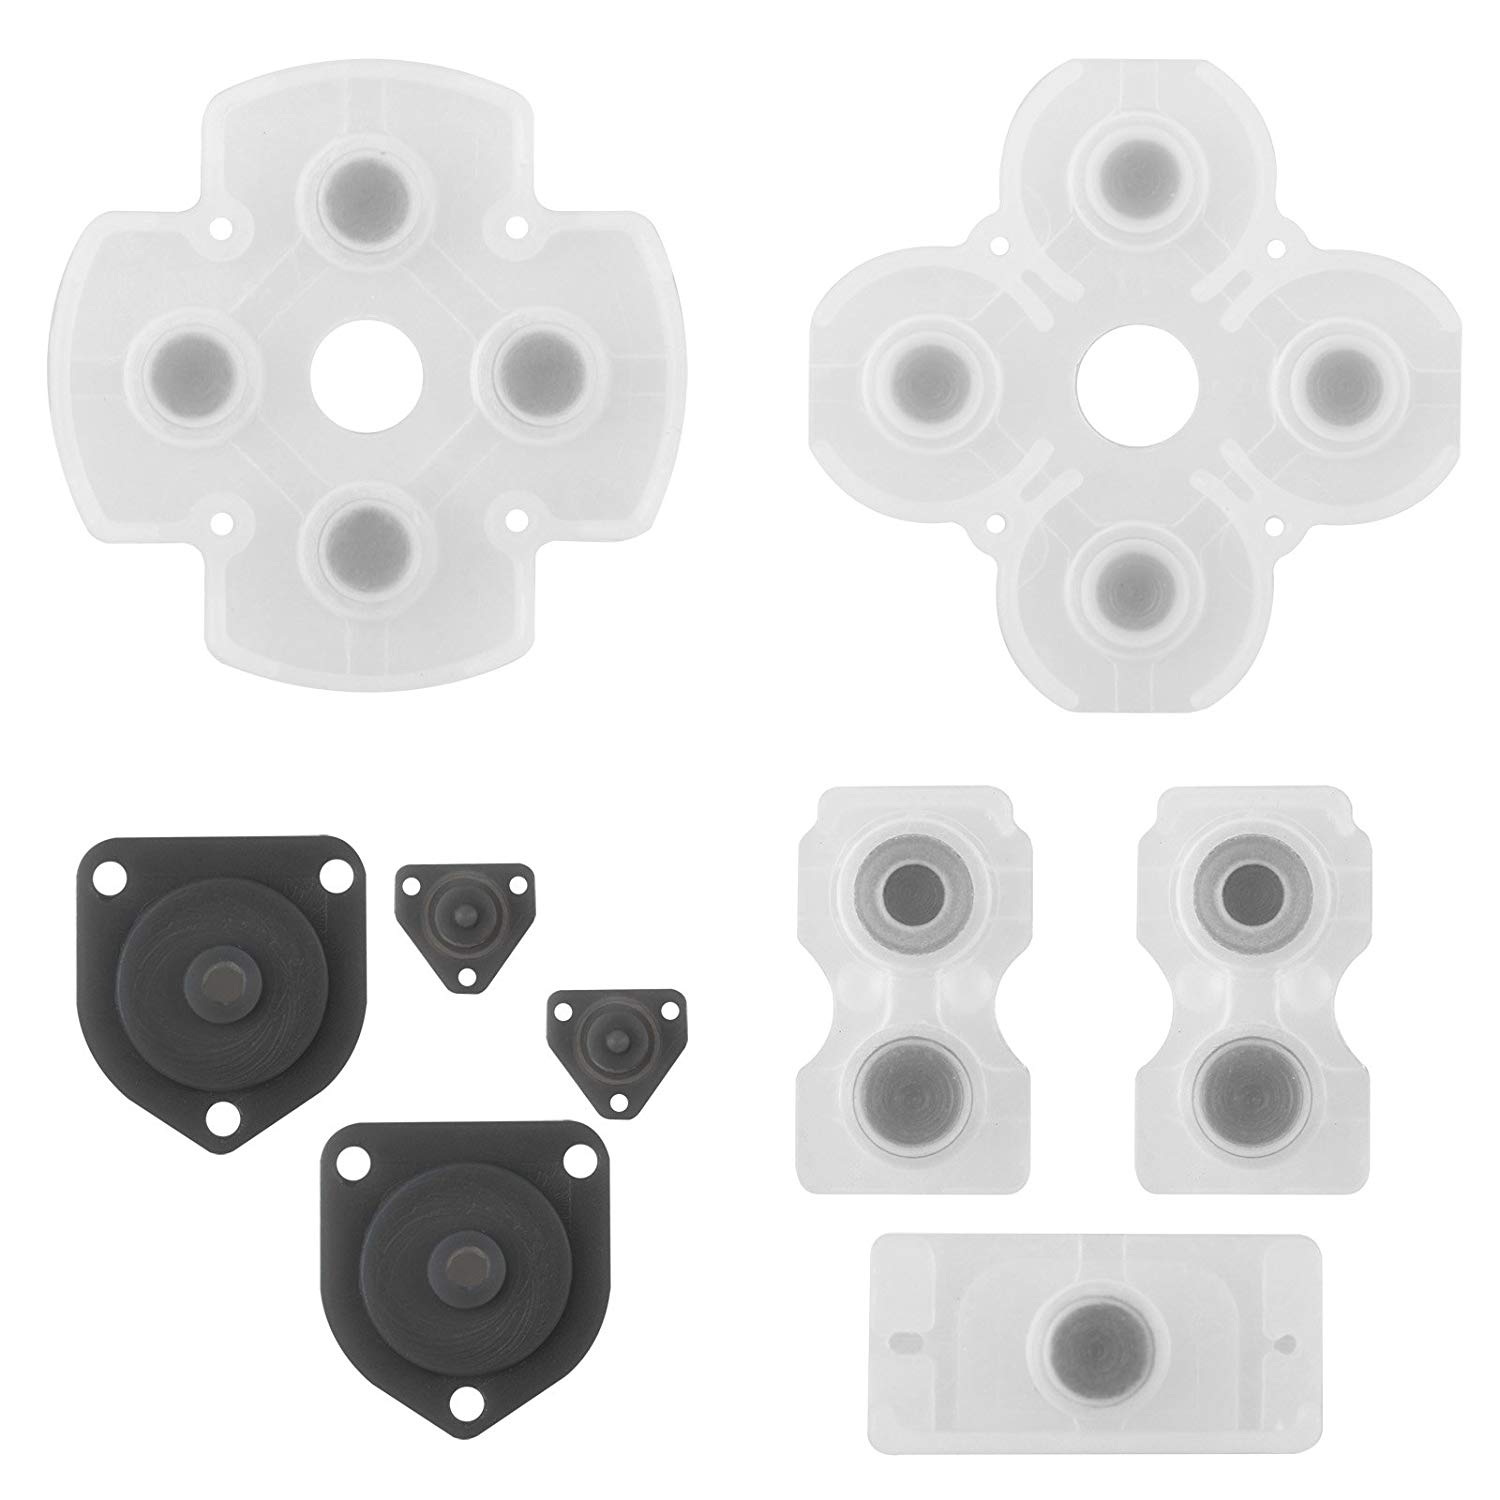 NEW PS4 Replacement Silicone Conductive Rubber Pad for ps4 Wireless Controller [video game]